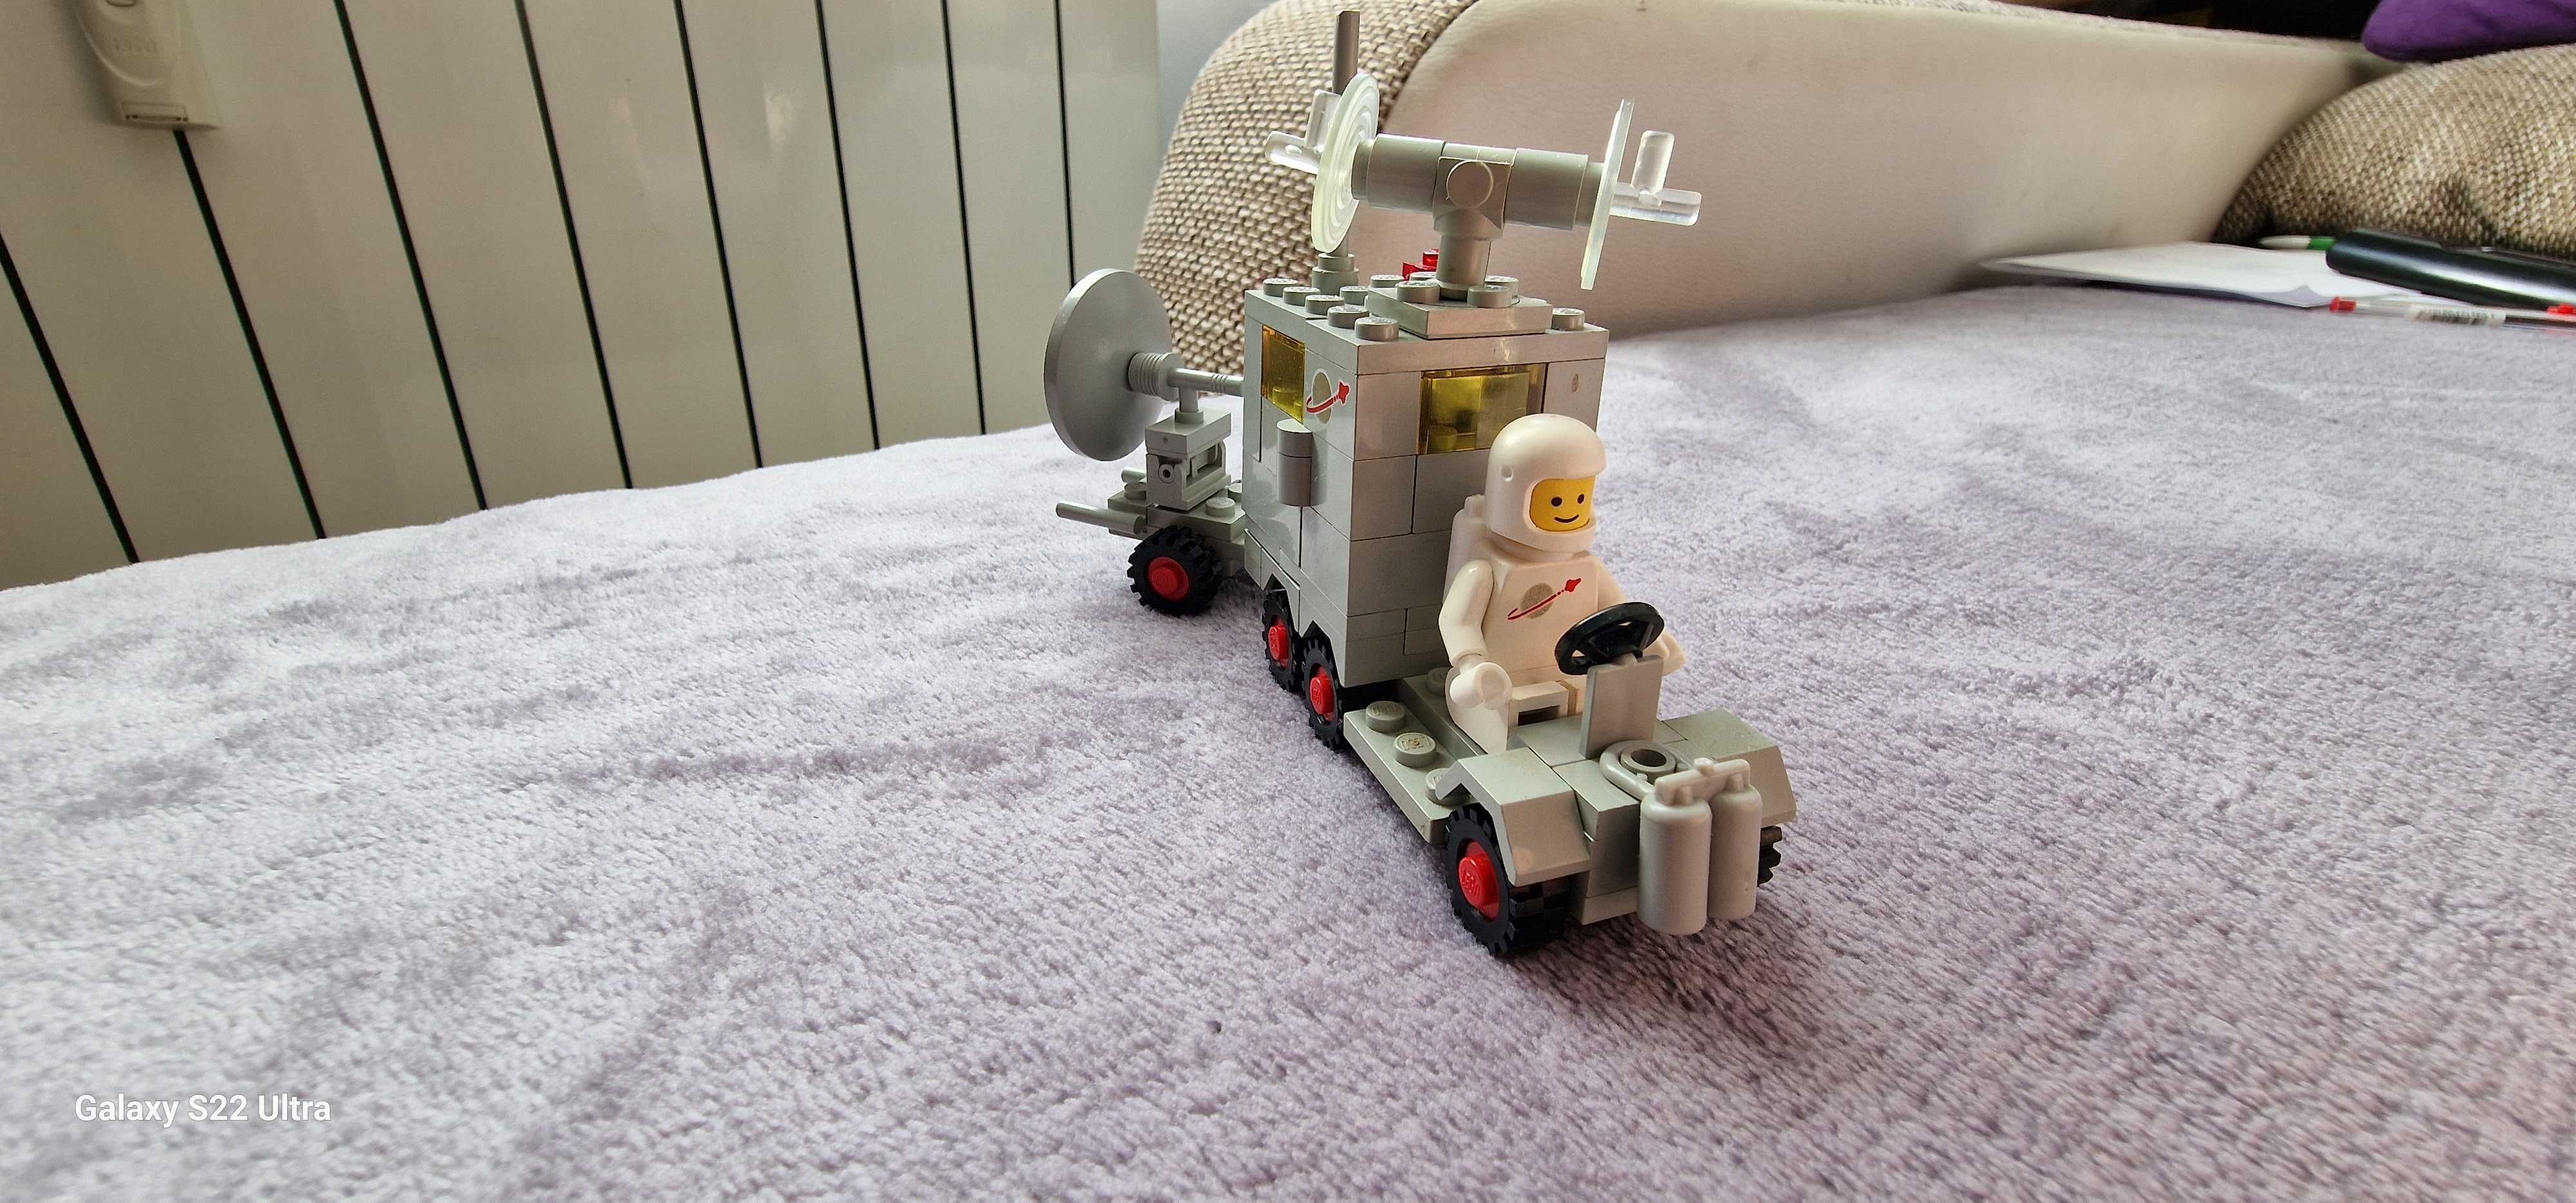 Lego 894 - Mobile Ground Tracking Station - an 1979